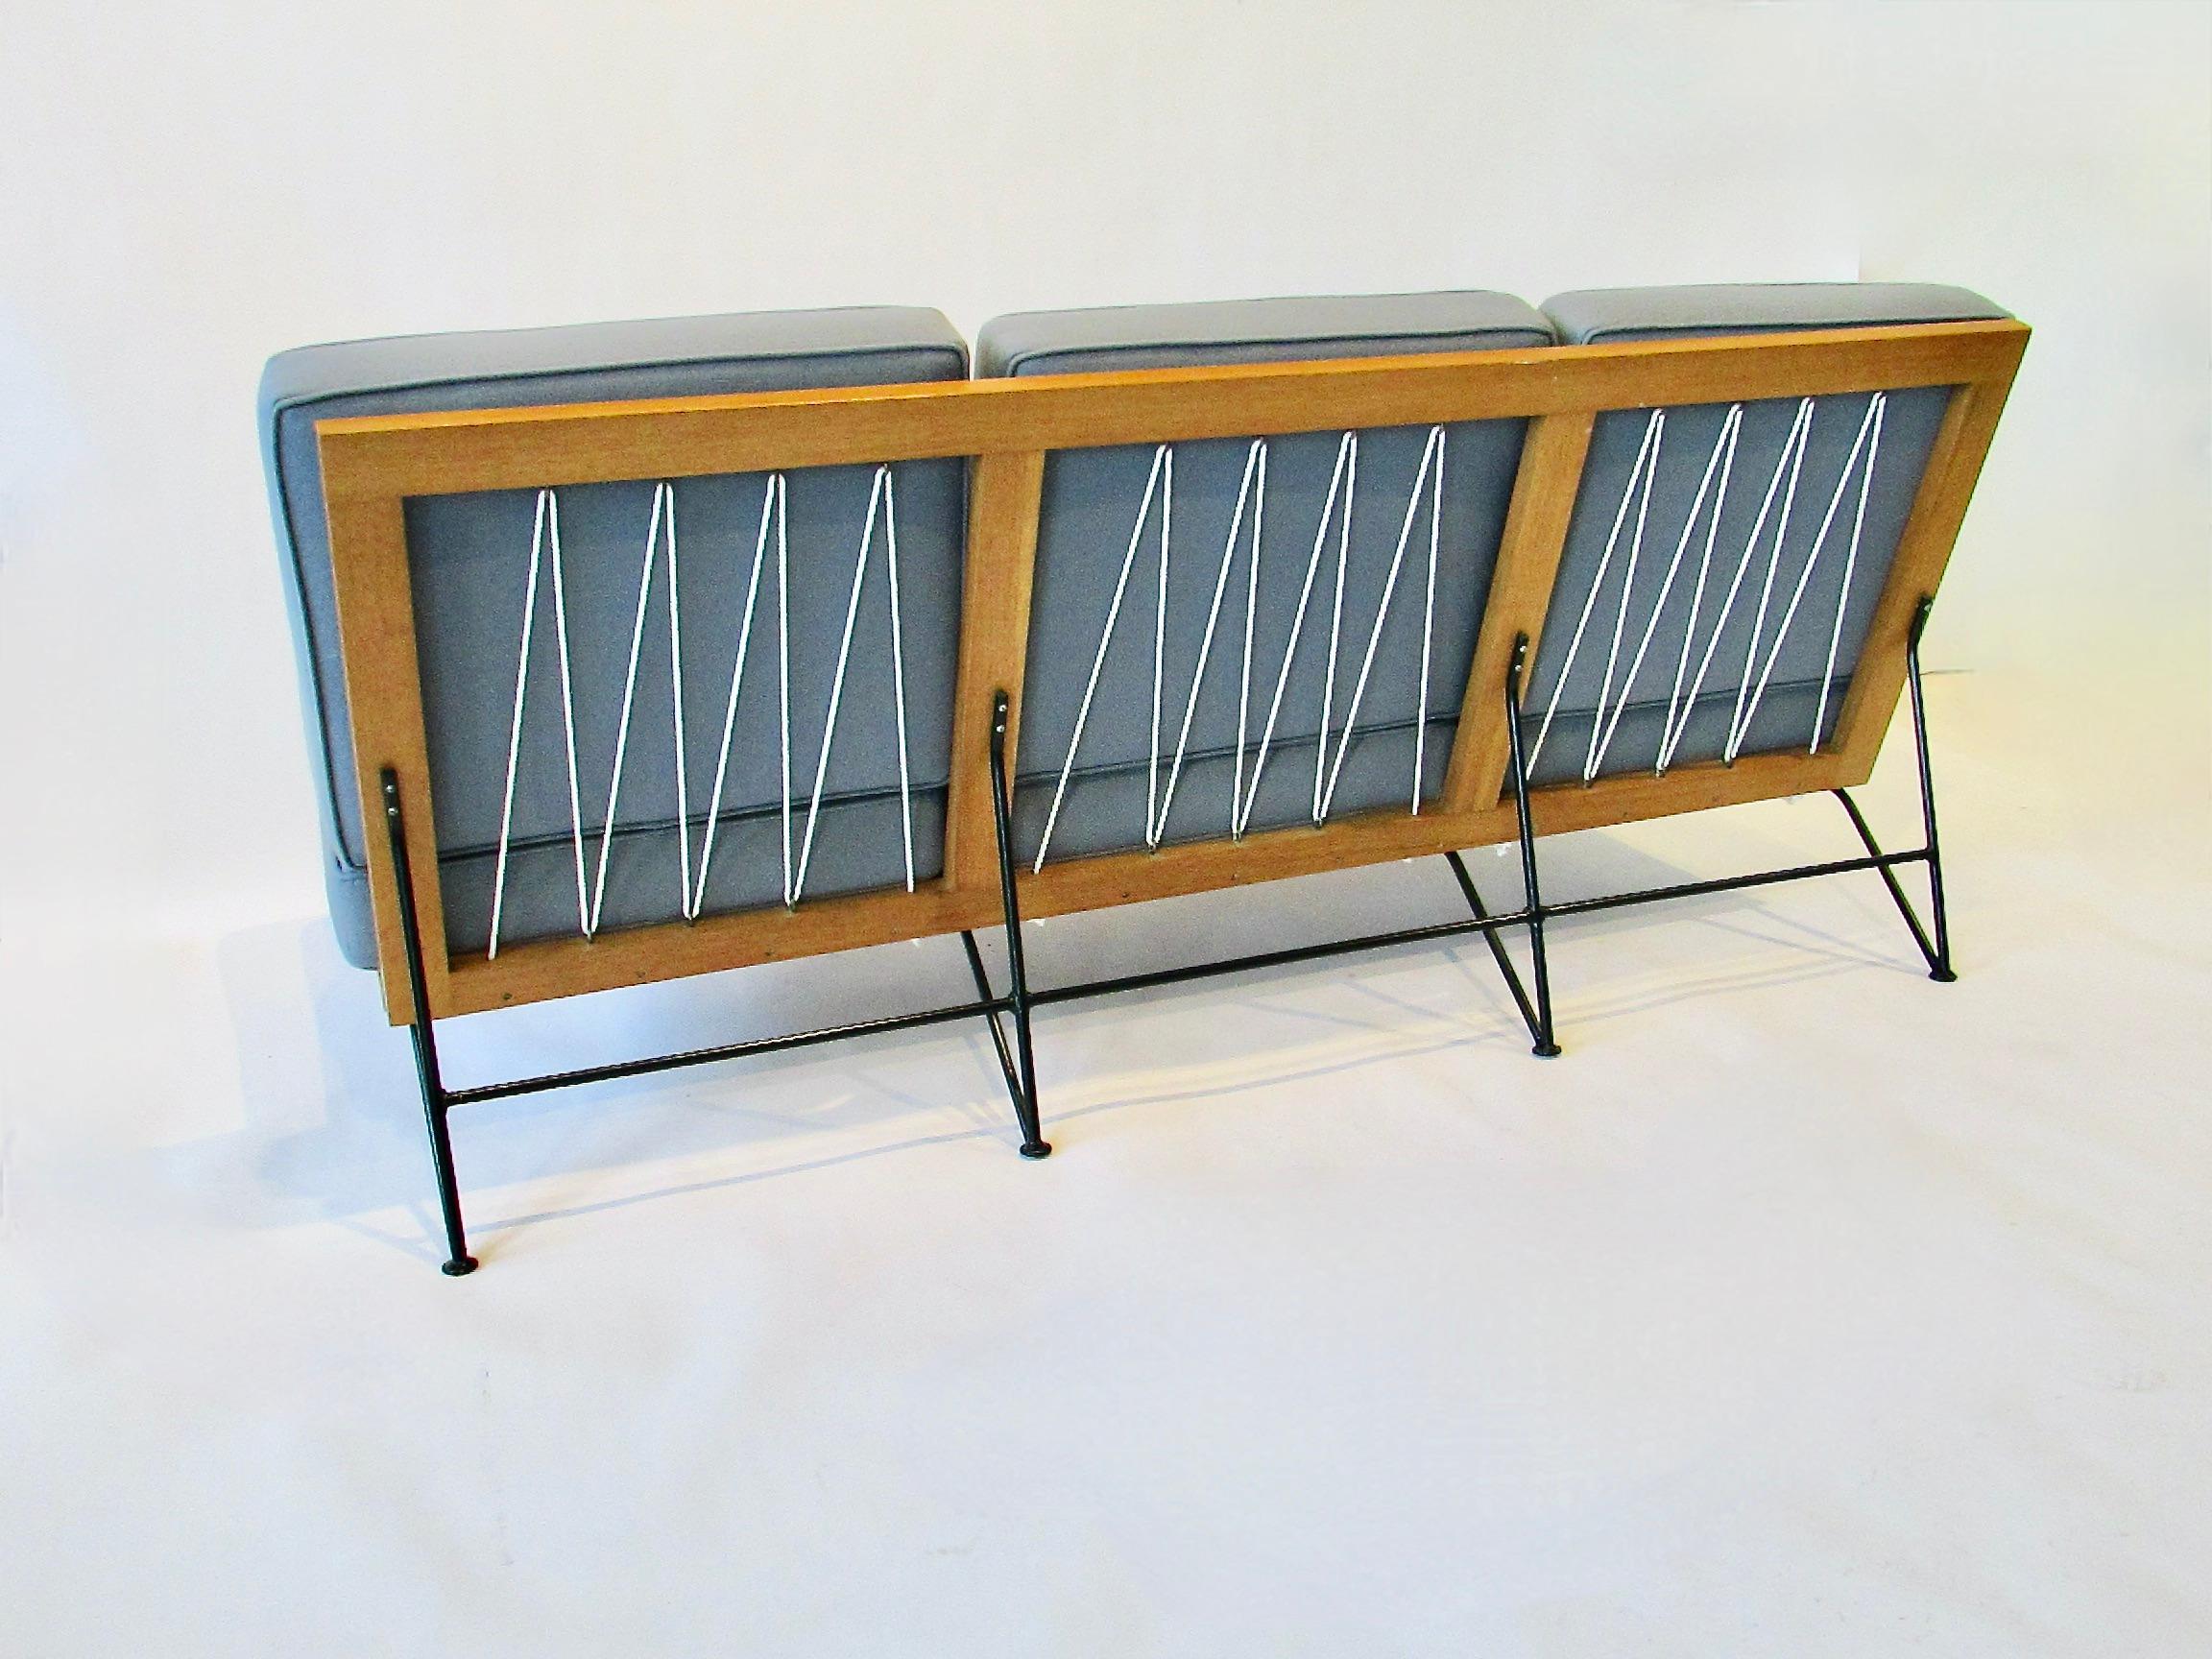 20th Century Saarinen Swanson Ficks Reed Wrought Iron with Wood Frame Couch For Sale